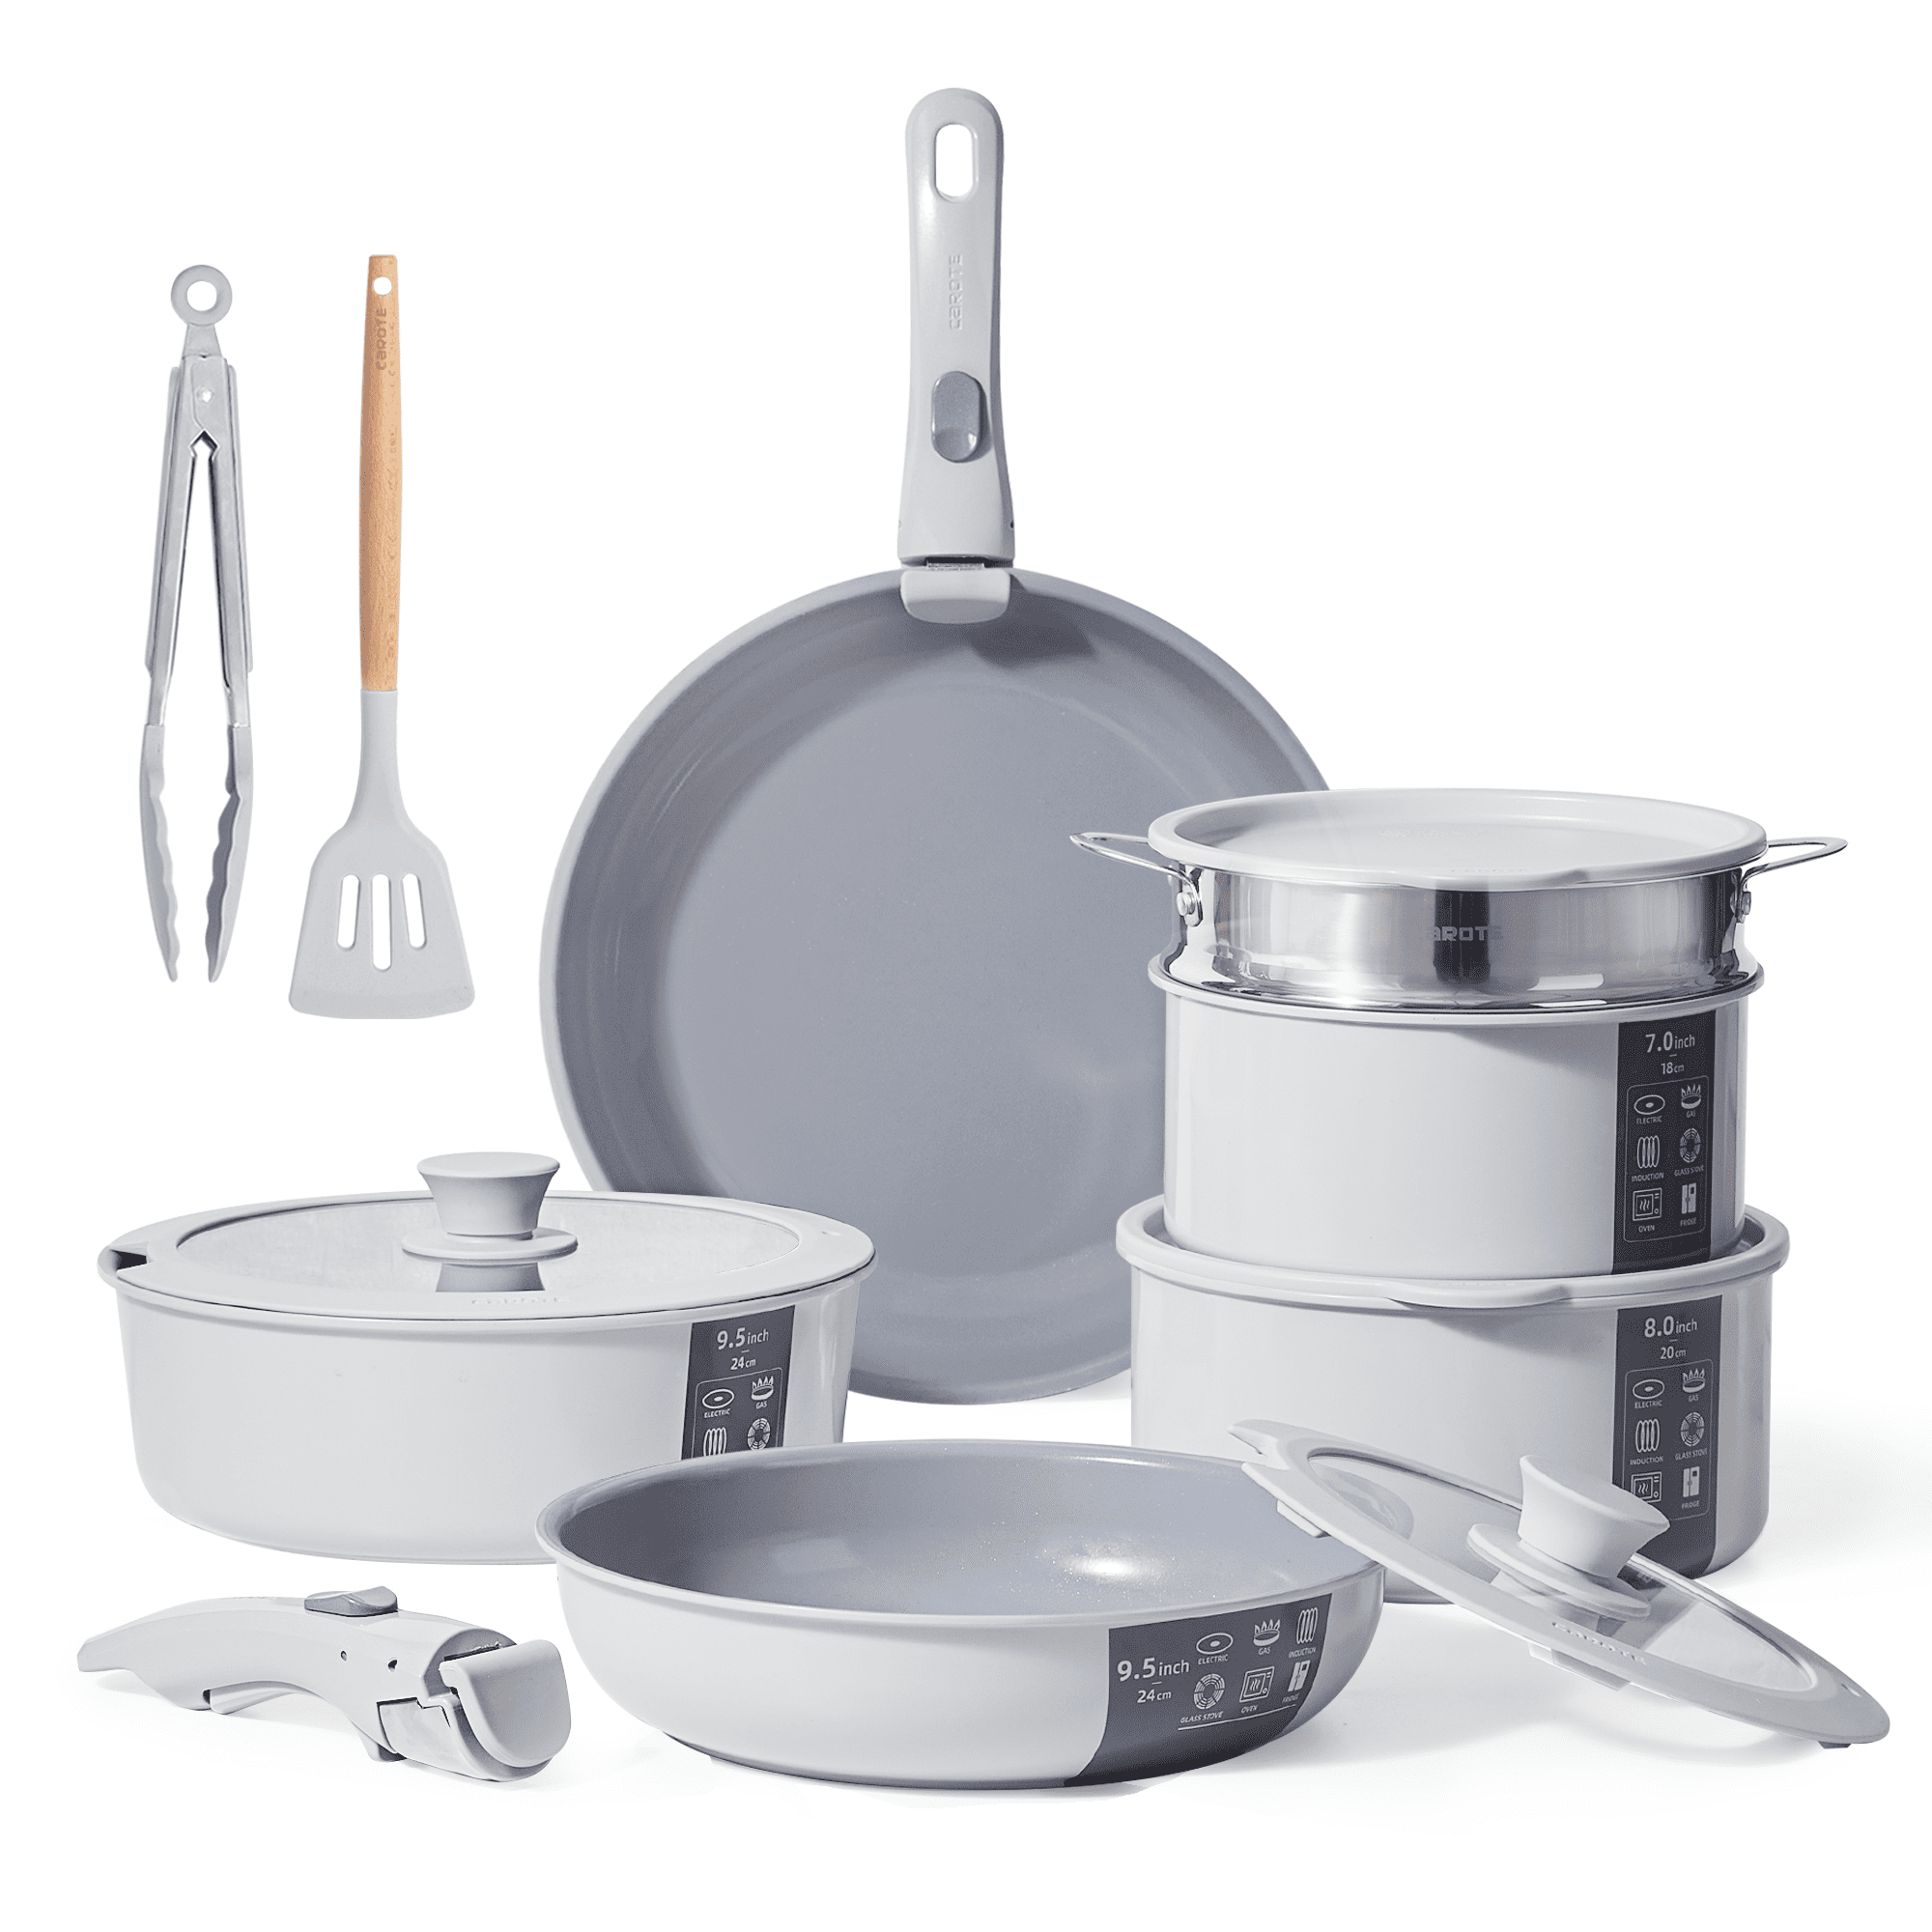 Carote 5 Piece Nonstick Cookware Sets, Granite Non Stick Pots and Pans Set  with Removable Handle Cookware, RV Cookware for Campers, Su